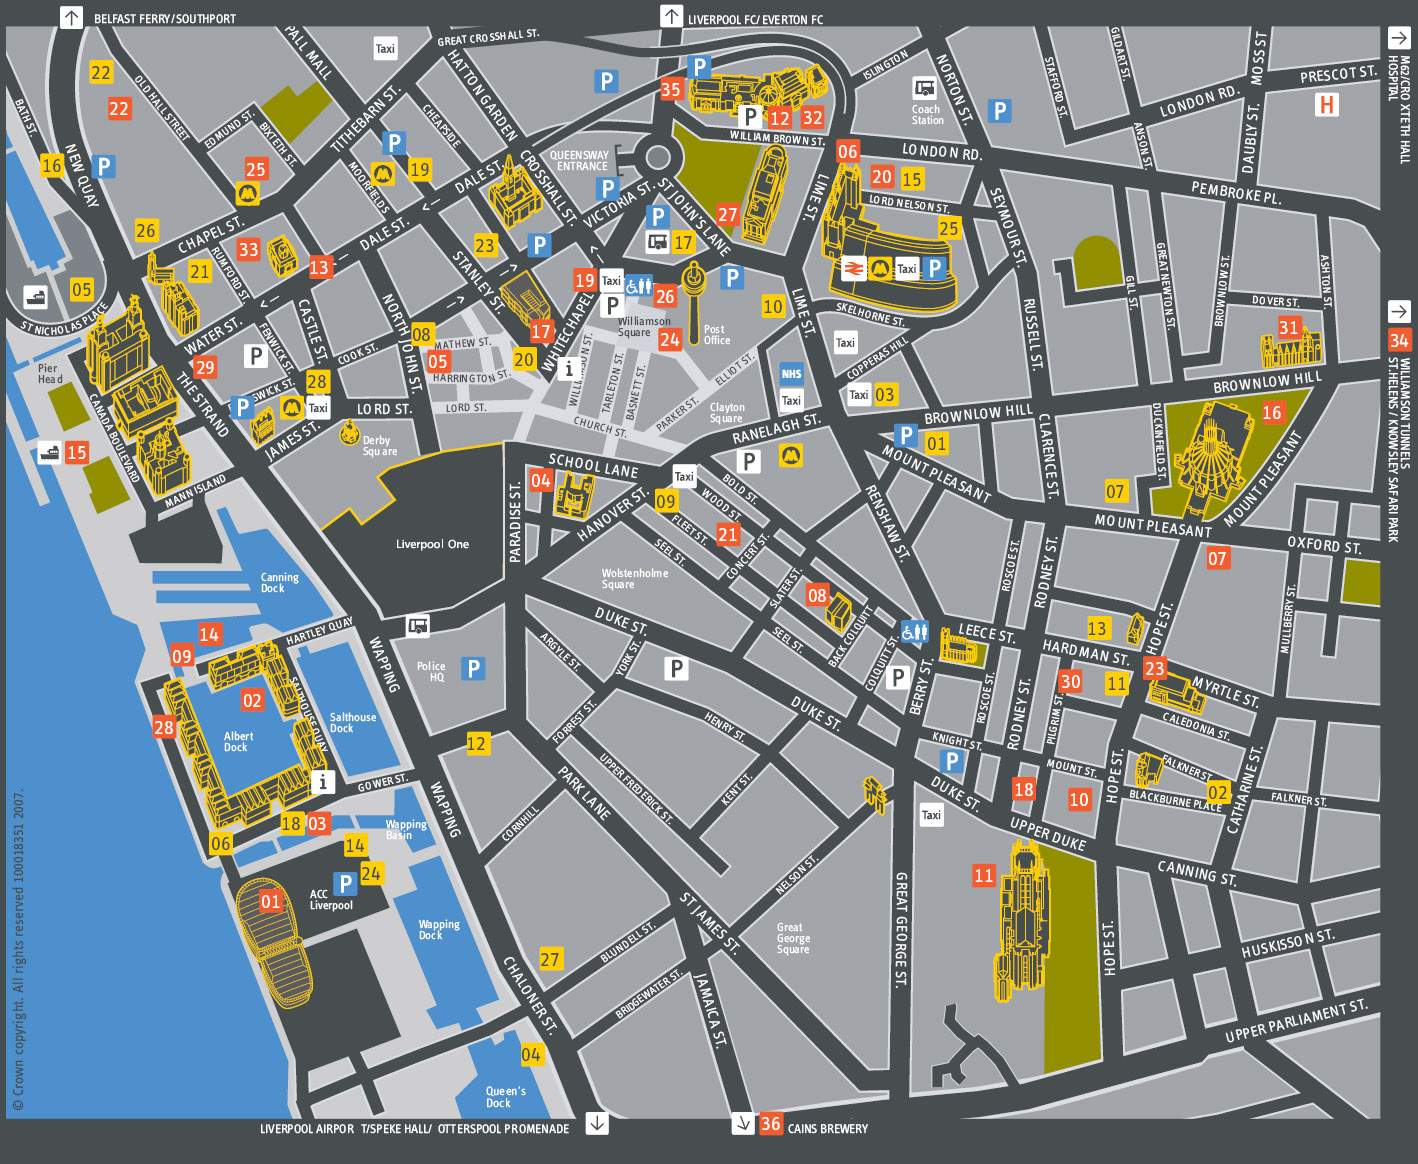 Street Map Of Liverpool Large Liverpool Maps For Free Download And Print | High-Resolution And  Detailed Maps